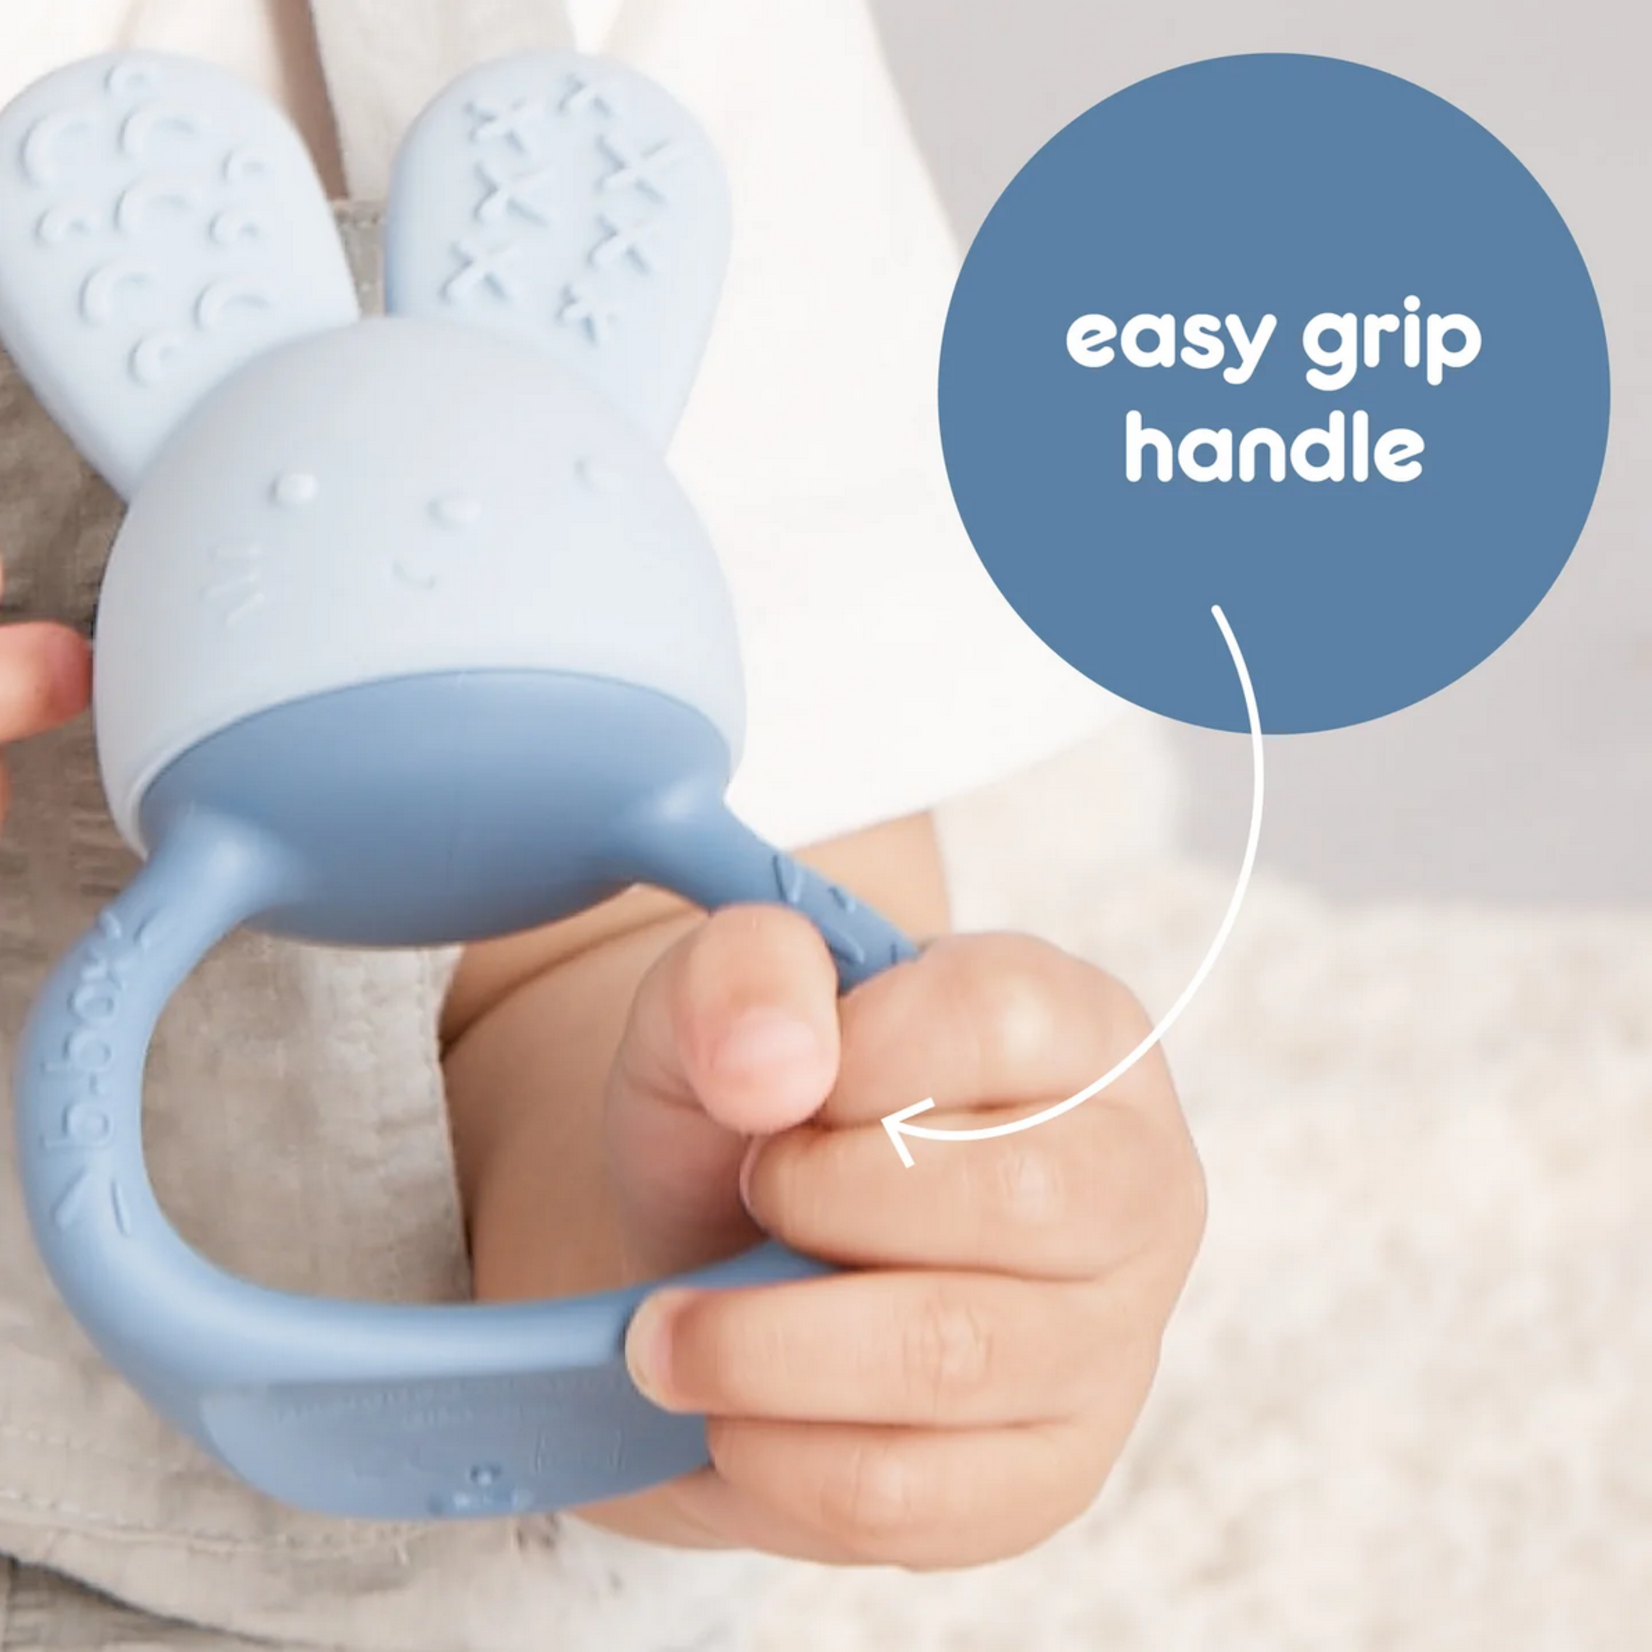 B.Box Chill + Fill Teether- lullaby blue